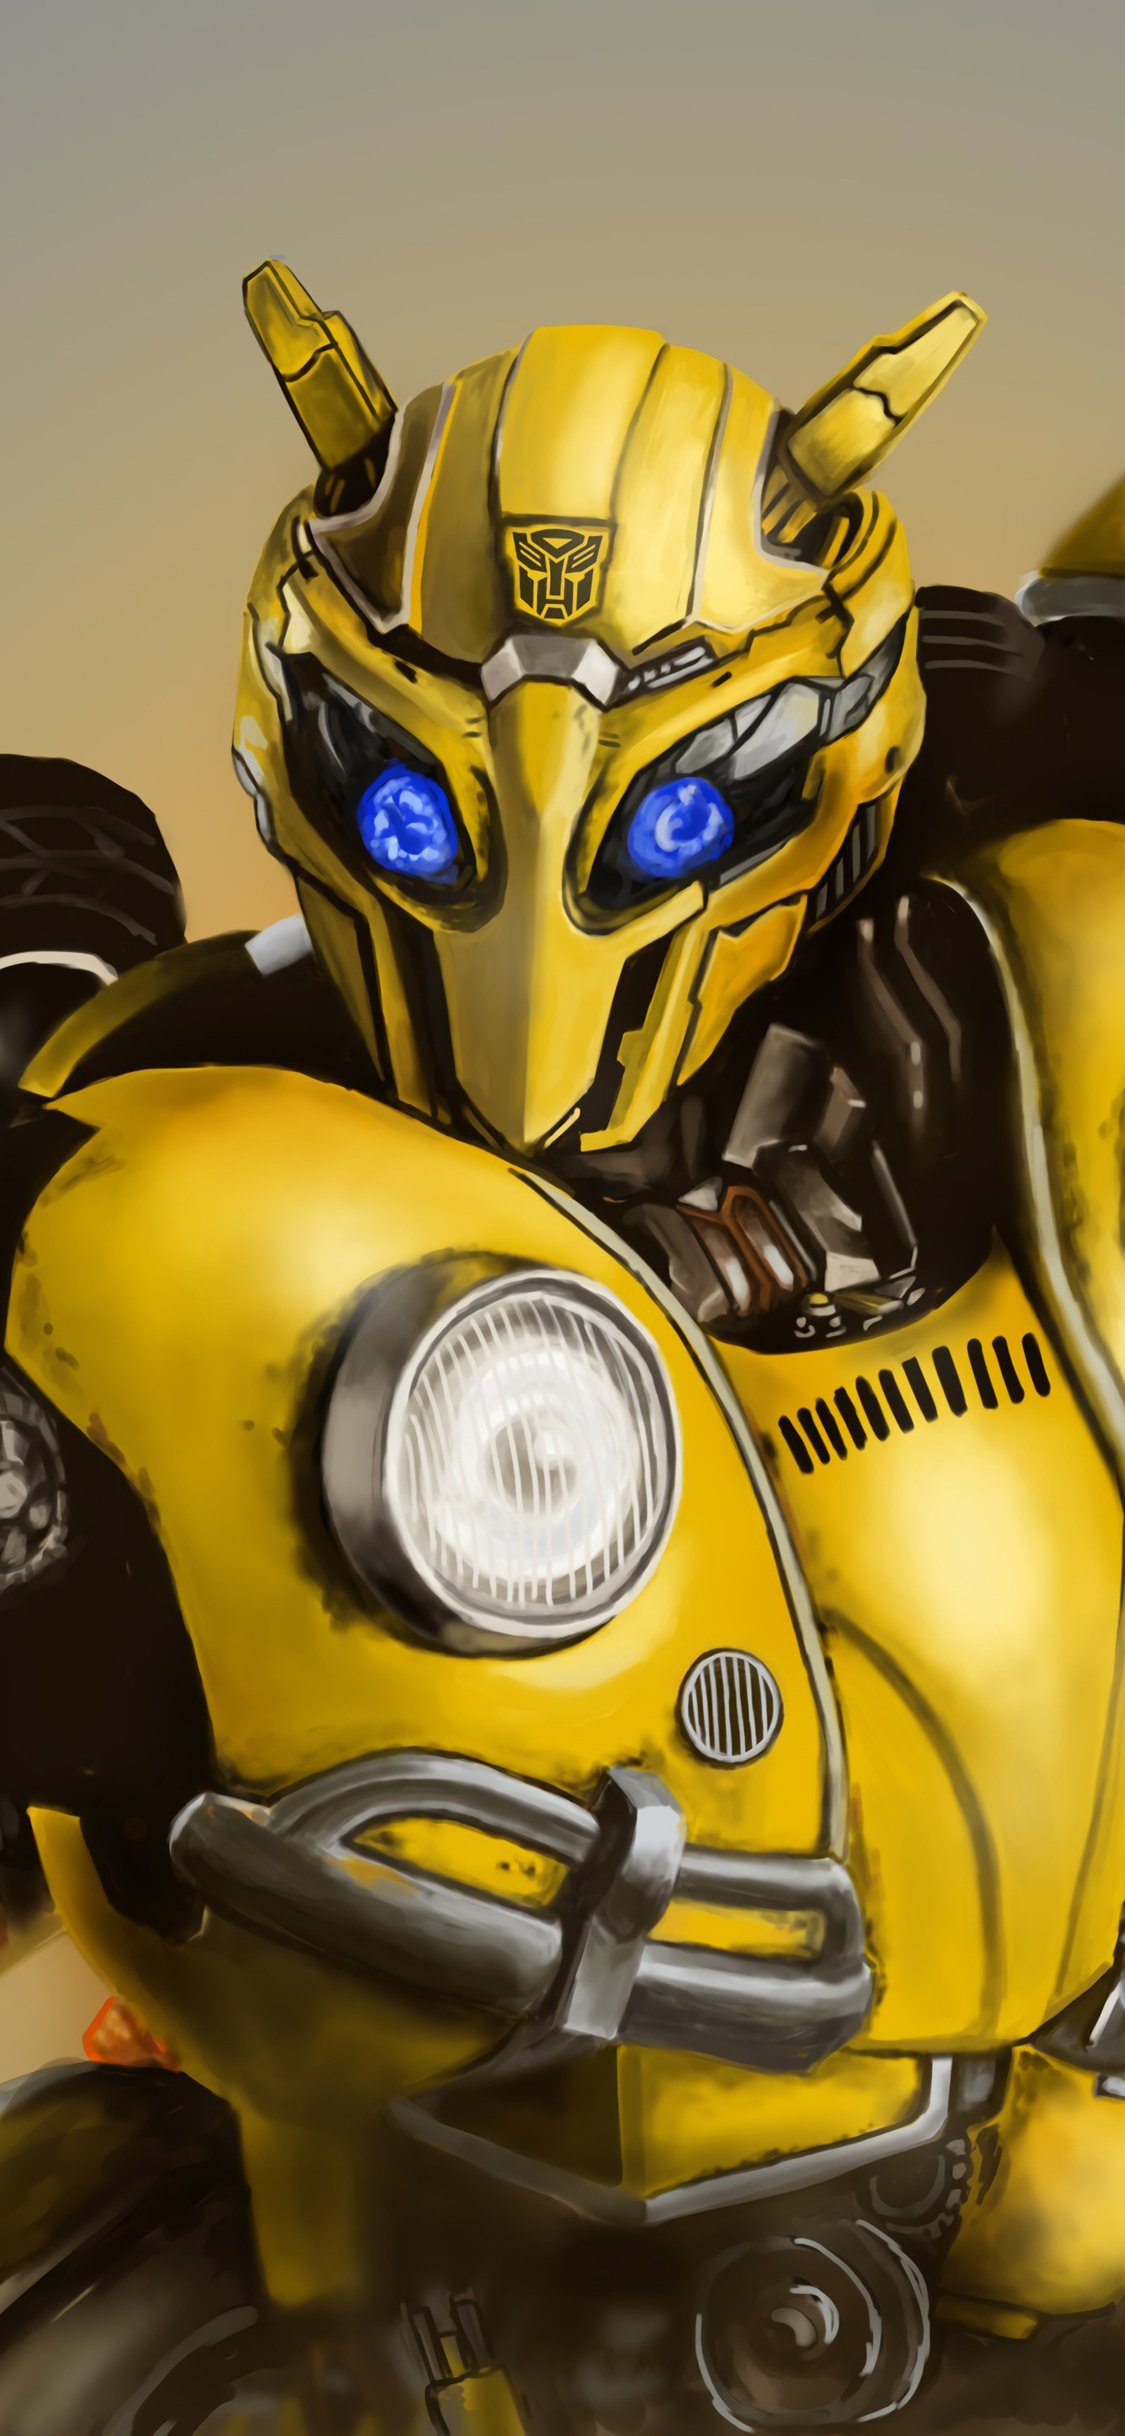 Bumblebee 4k New 2019 iPhone XS, iPhone iPhone X HD 4k Wallpaper, Image, Background, Photo and Picture